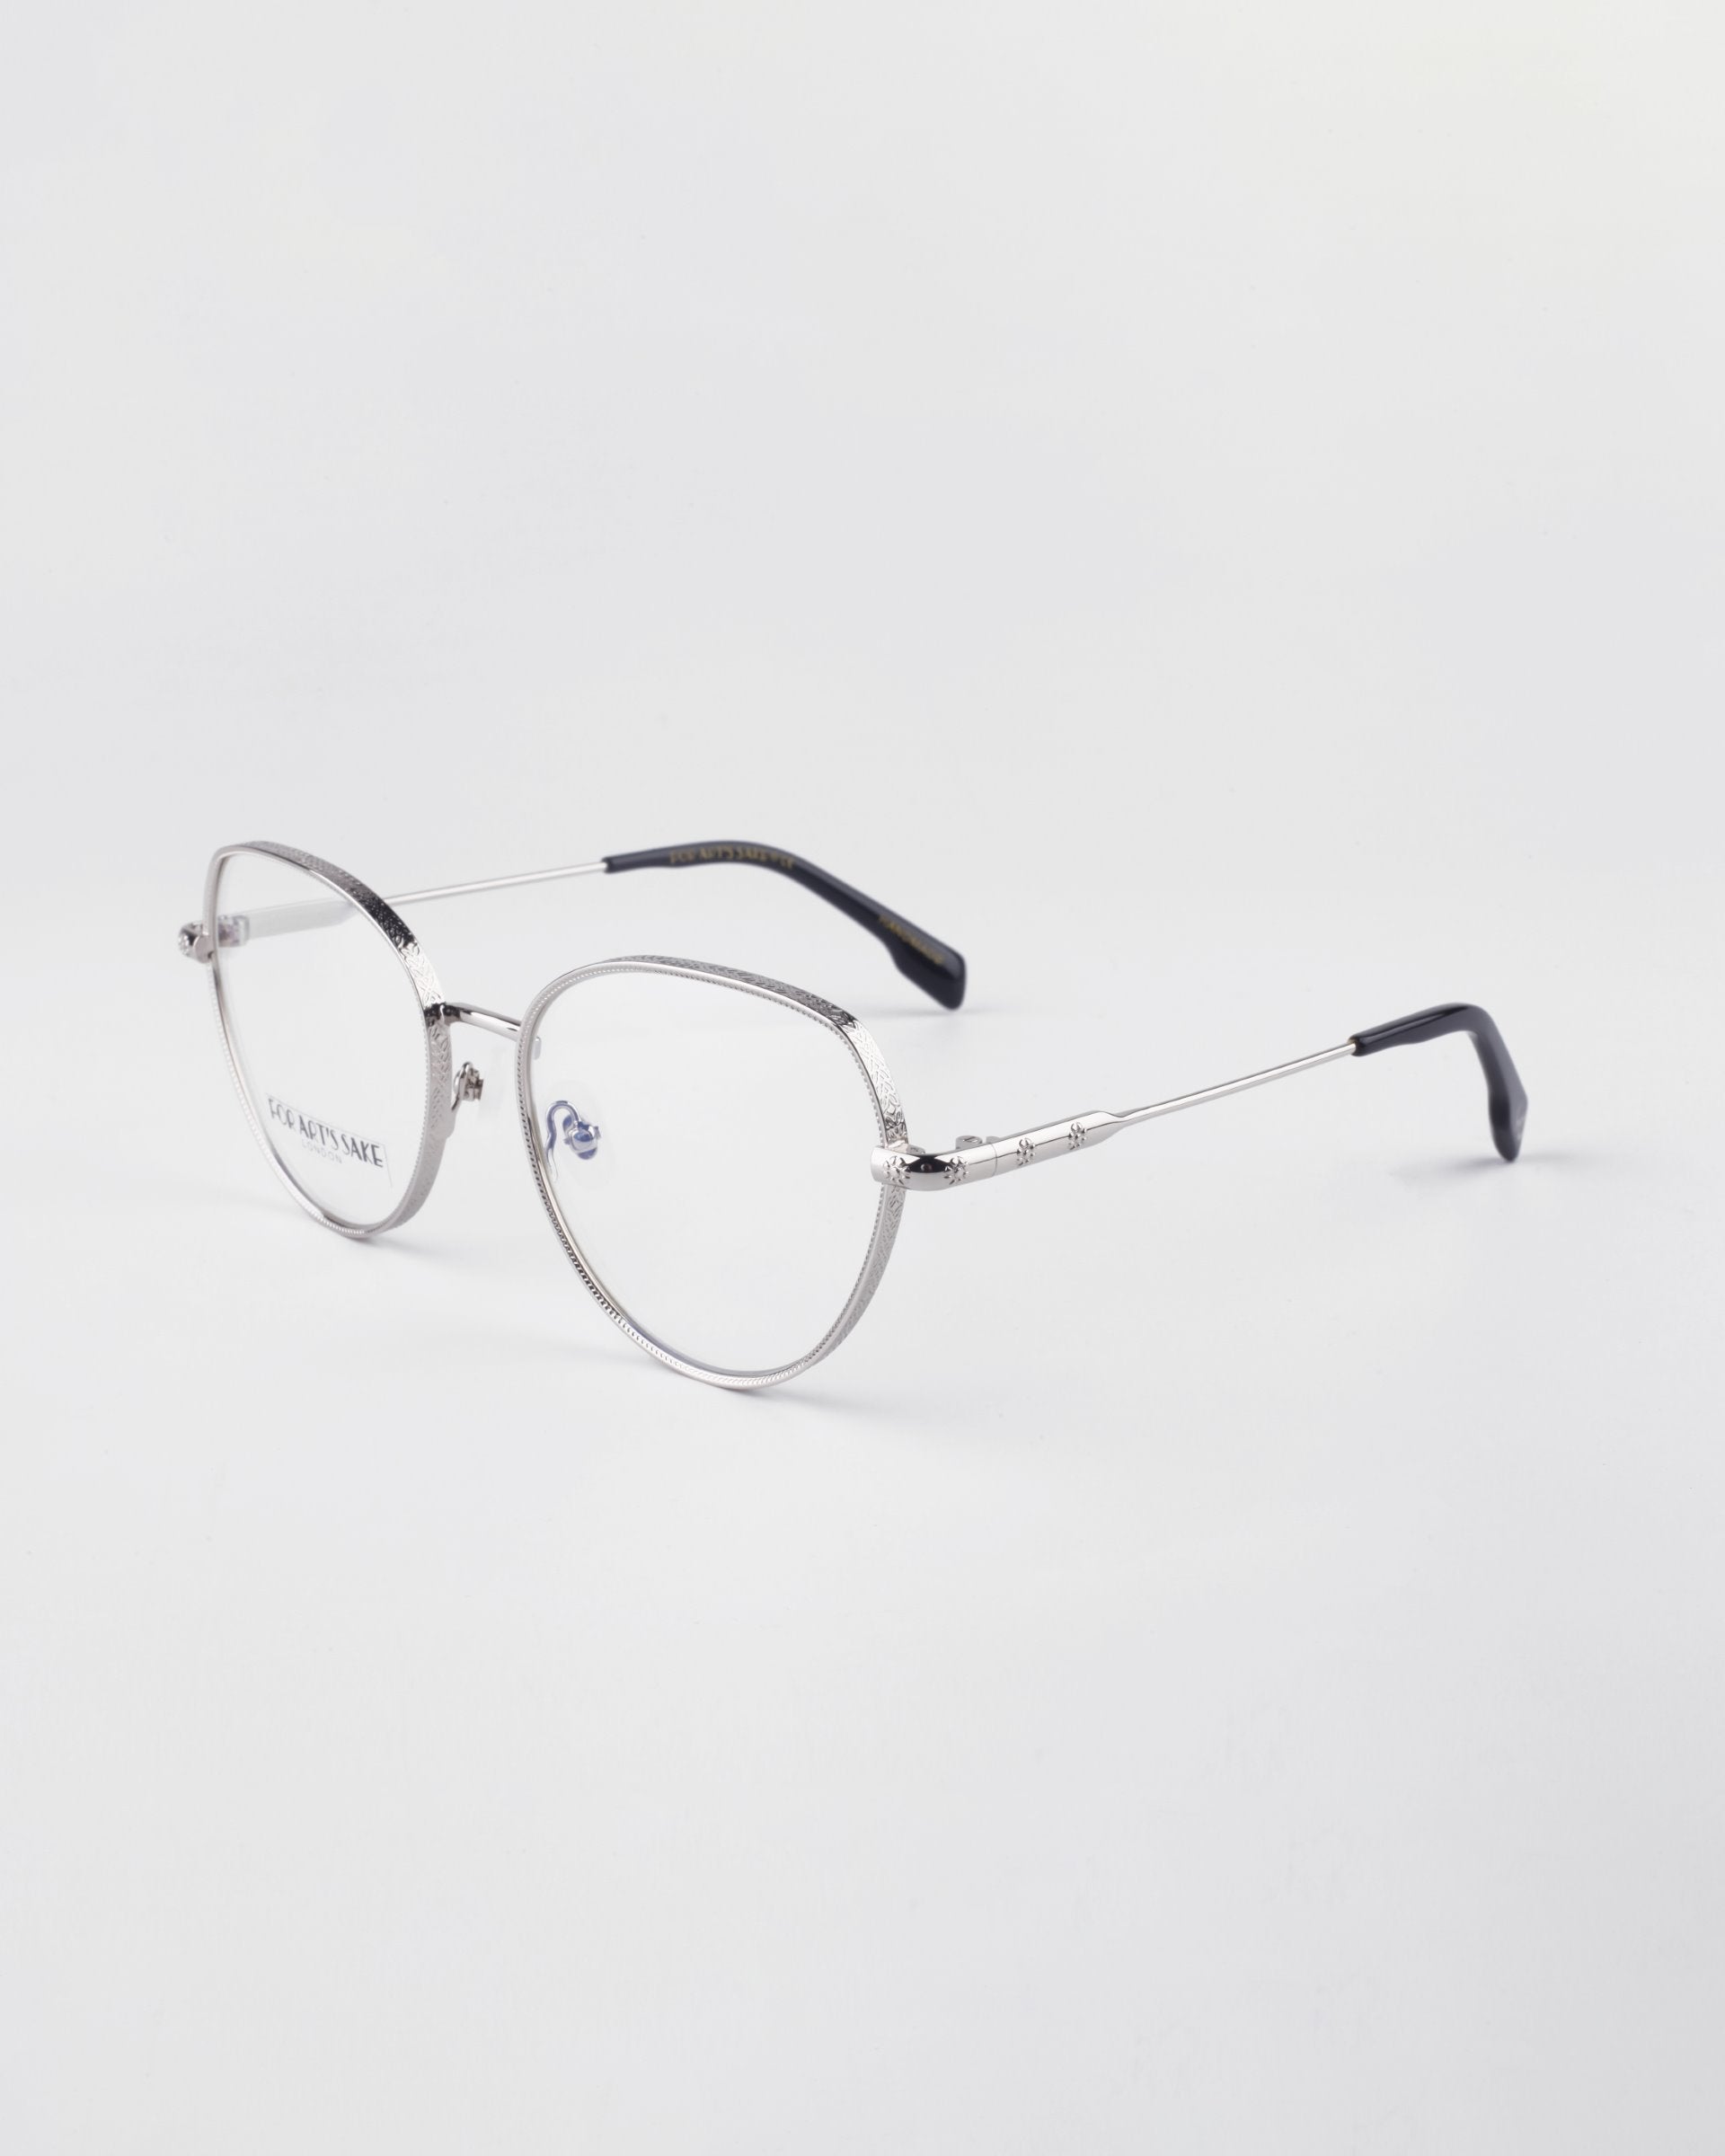 A pair of stylish round metal eyeglasses with a silver, 18-karat gold-plated frame and black temple tips, placed on a white background. The Frida Floral by For Art&#39;s Sake® glasses have thin, delicate frames and nose pads for comfort. Complete with blue light filter for extra eye protection.